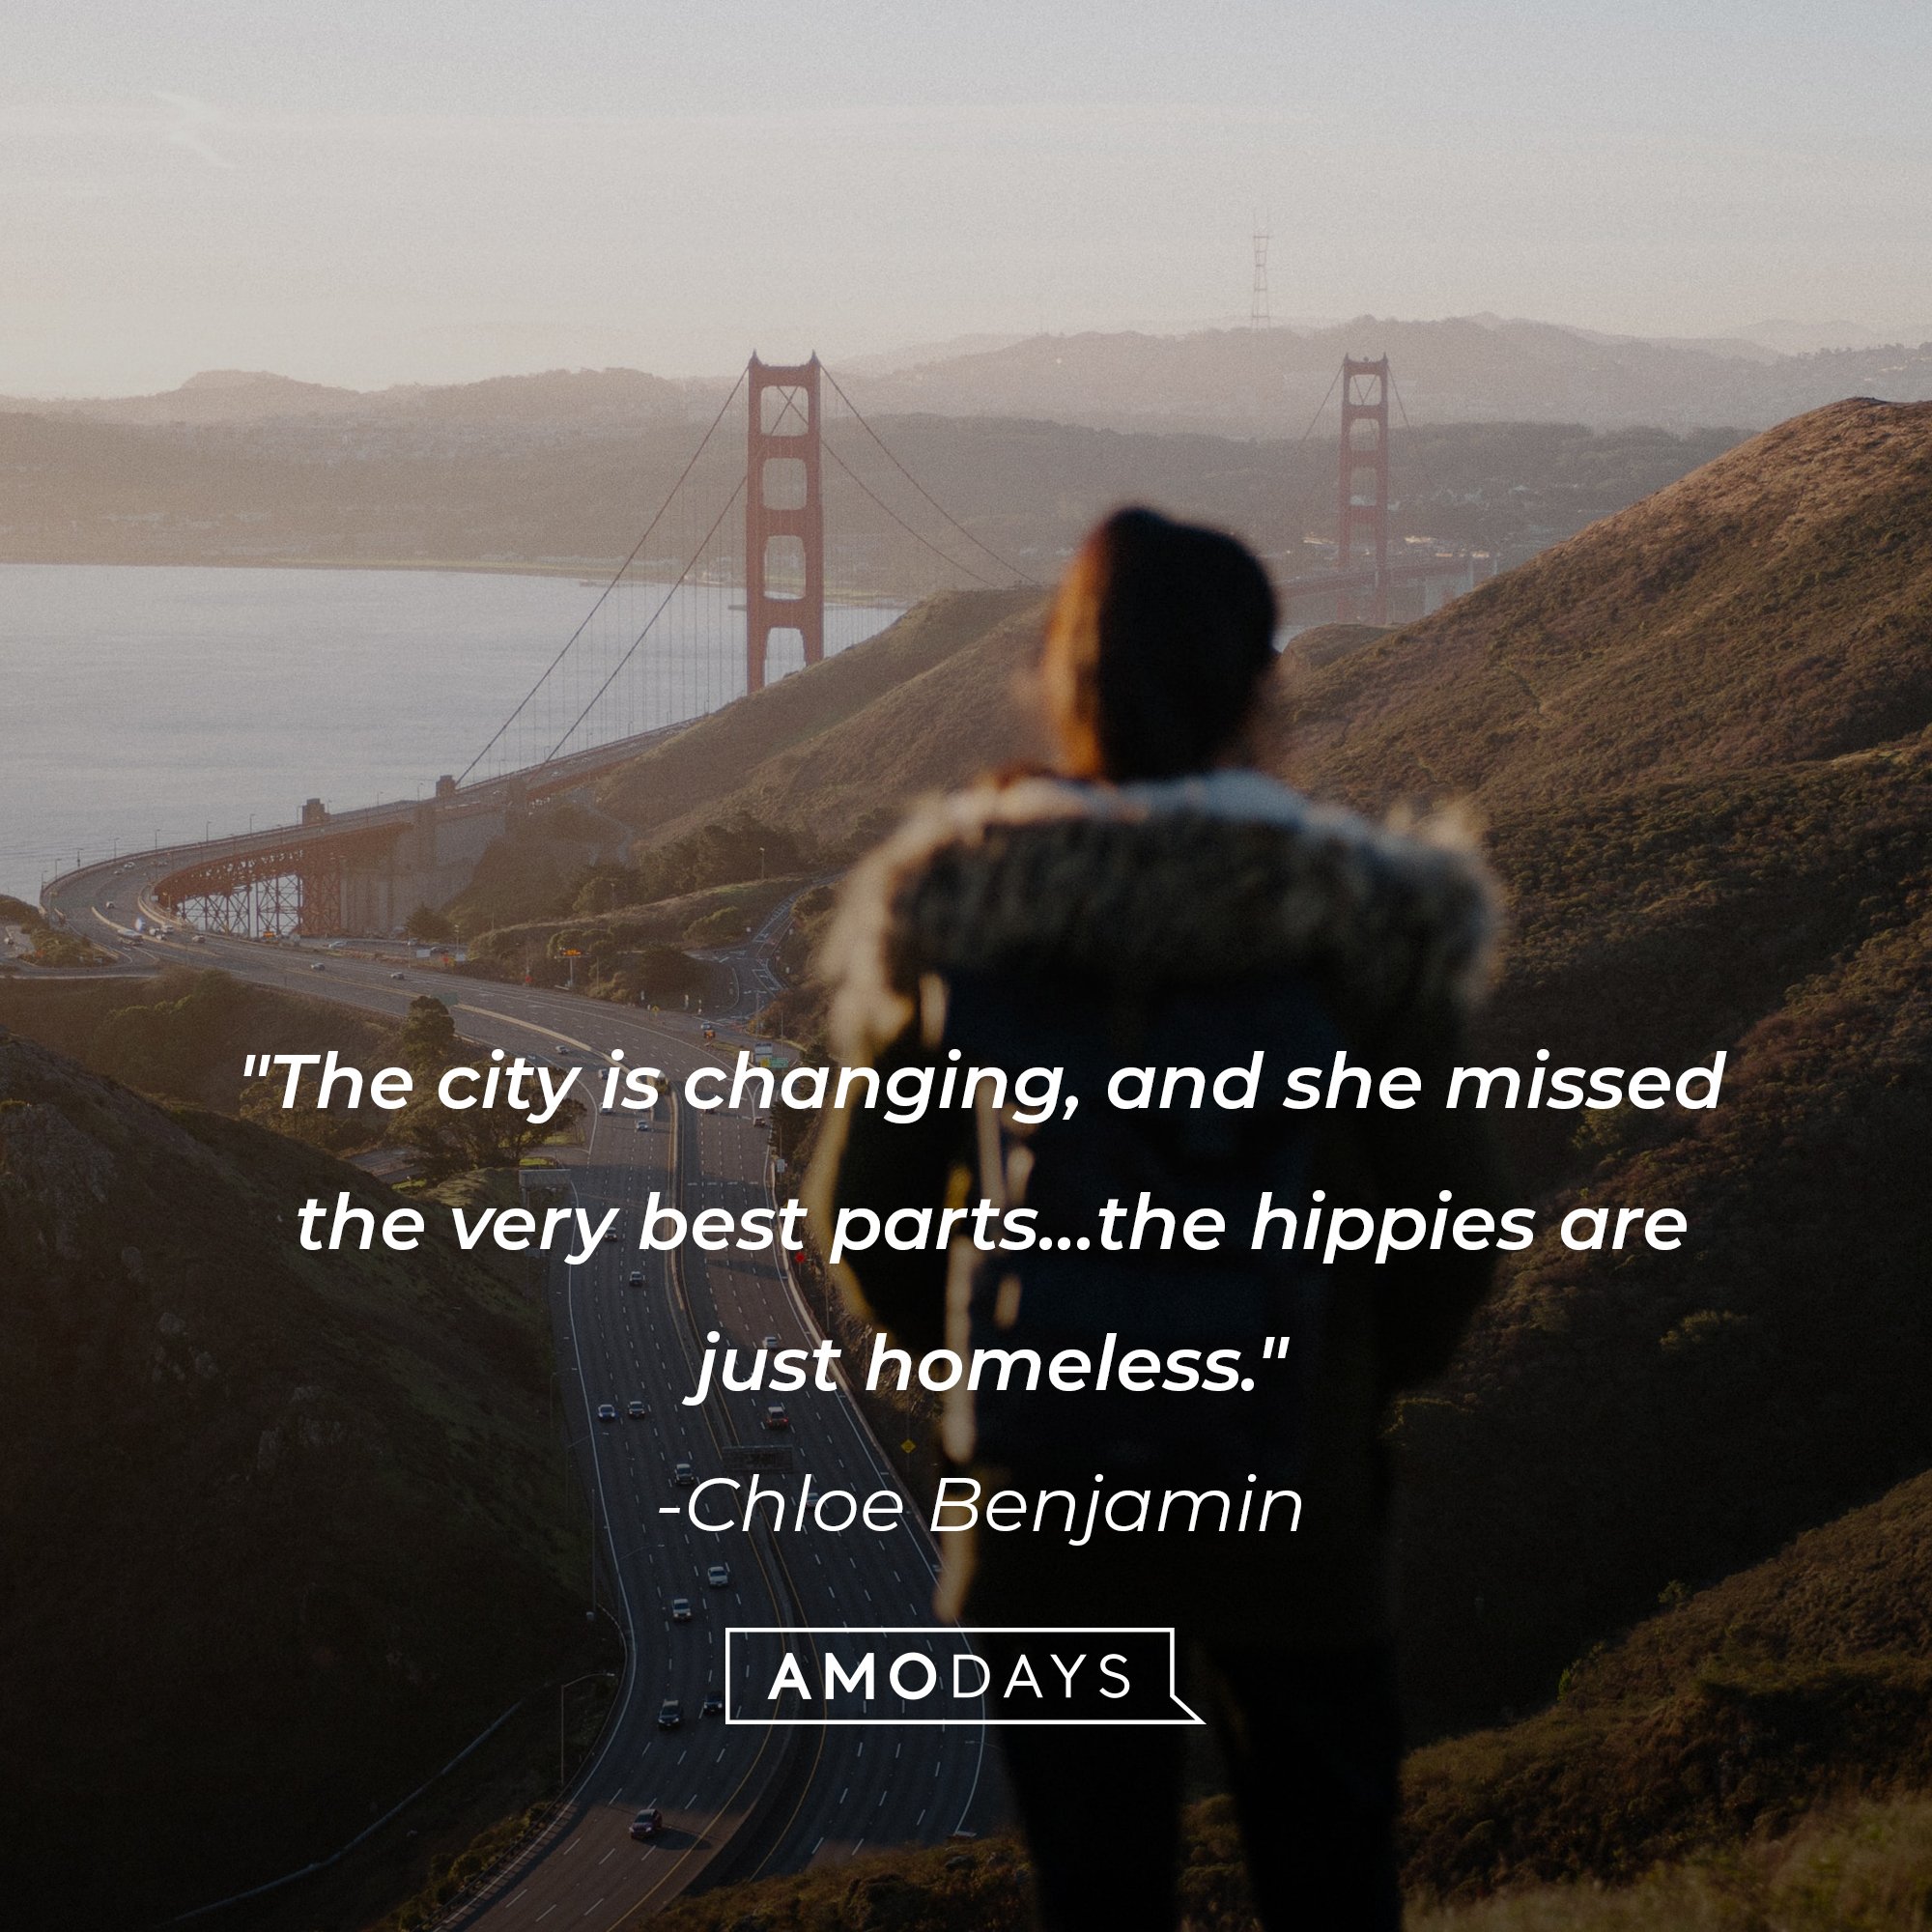  Chloe Benjamin’s quote: "The city is changing, and she missed the very best parts... the hippies are just homeless." | Image: AmoDays